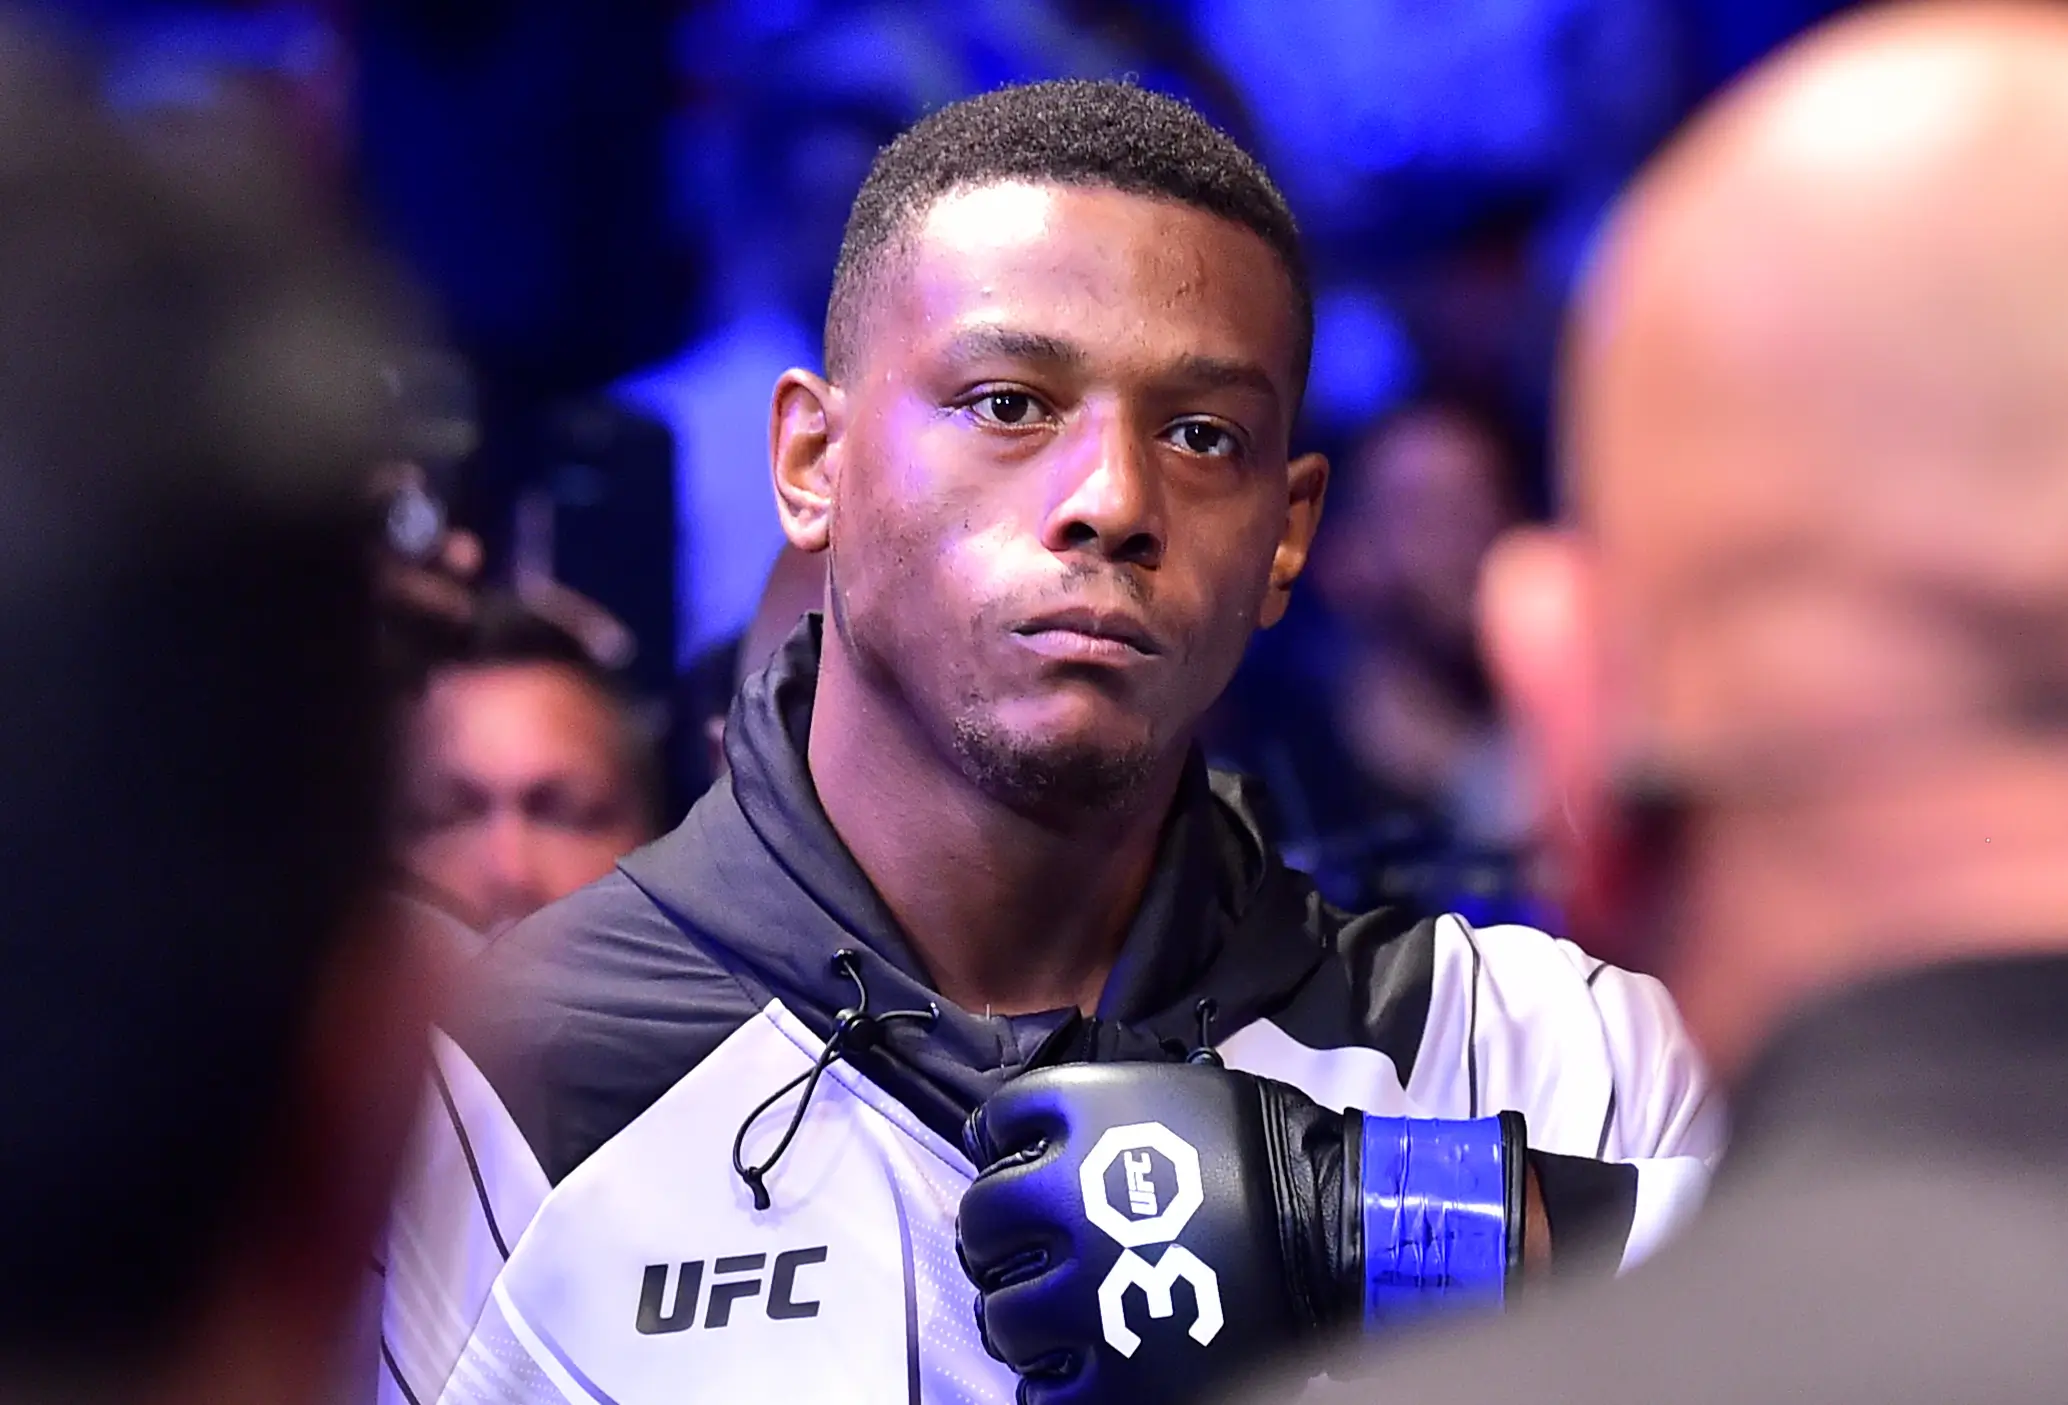 UFC Star Jamahal Hill’s Domestic Violence Case Update